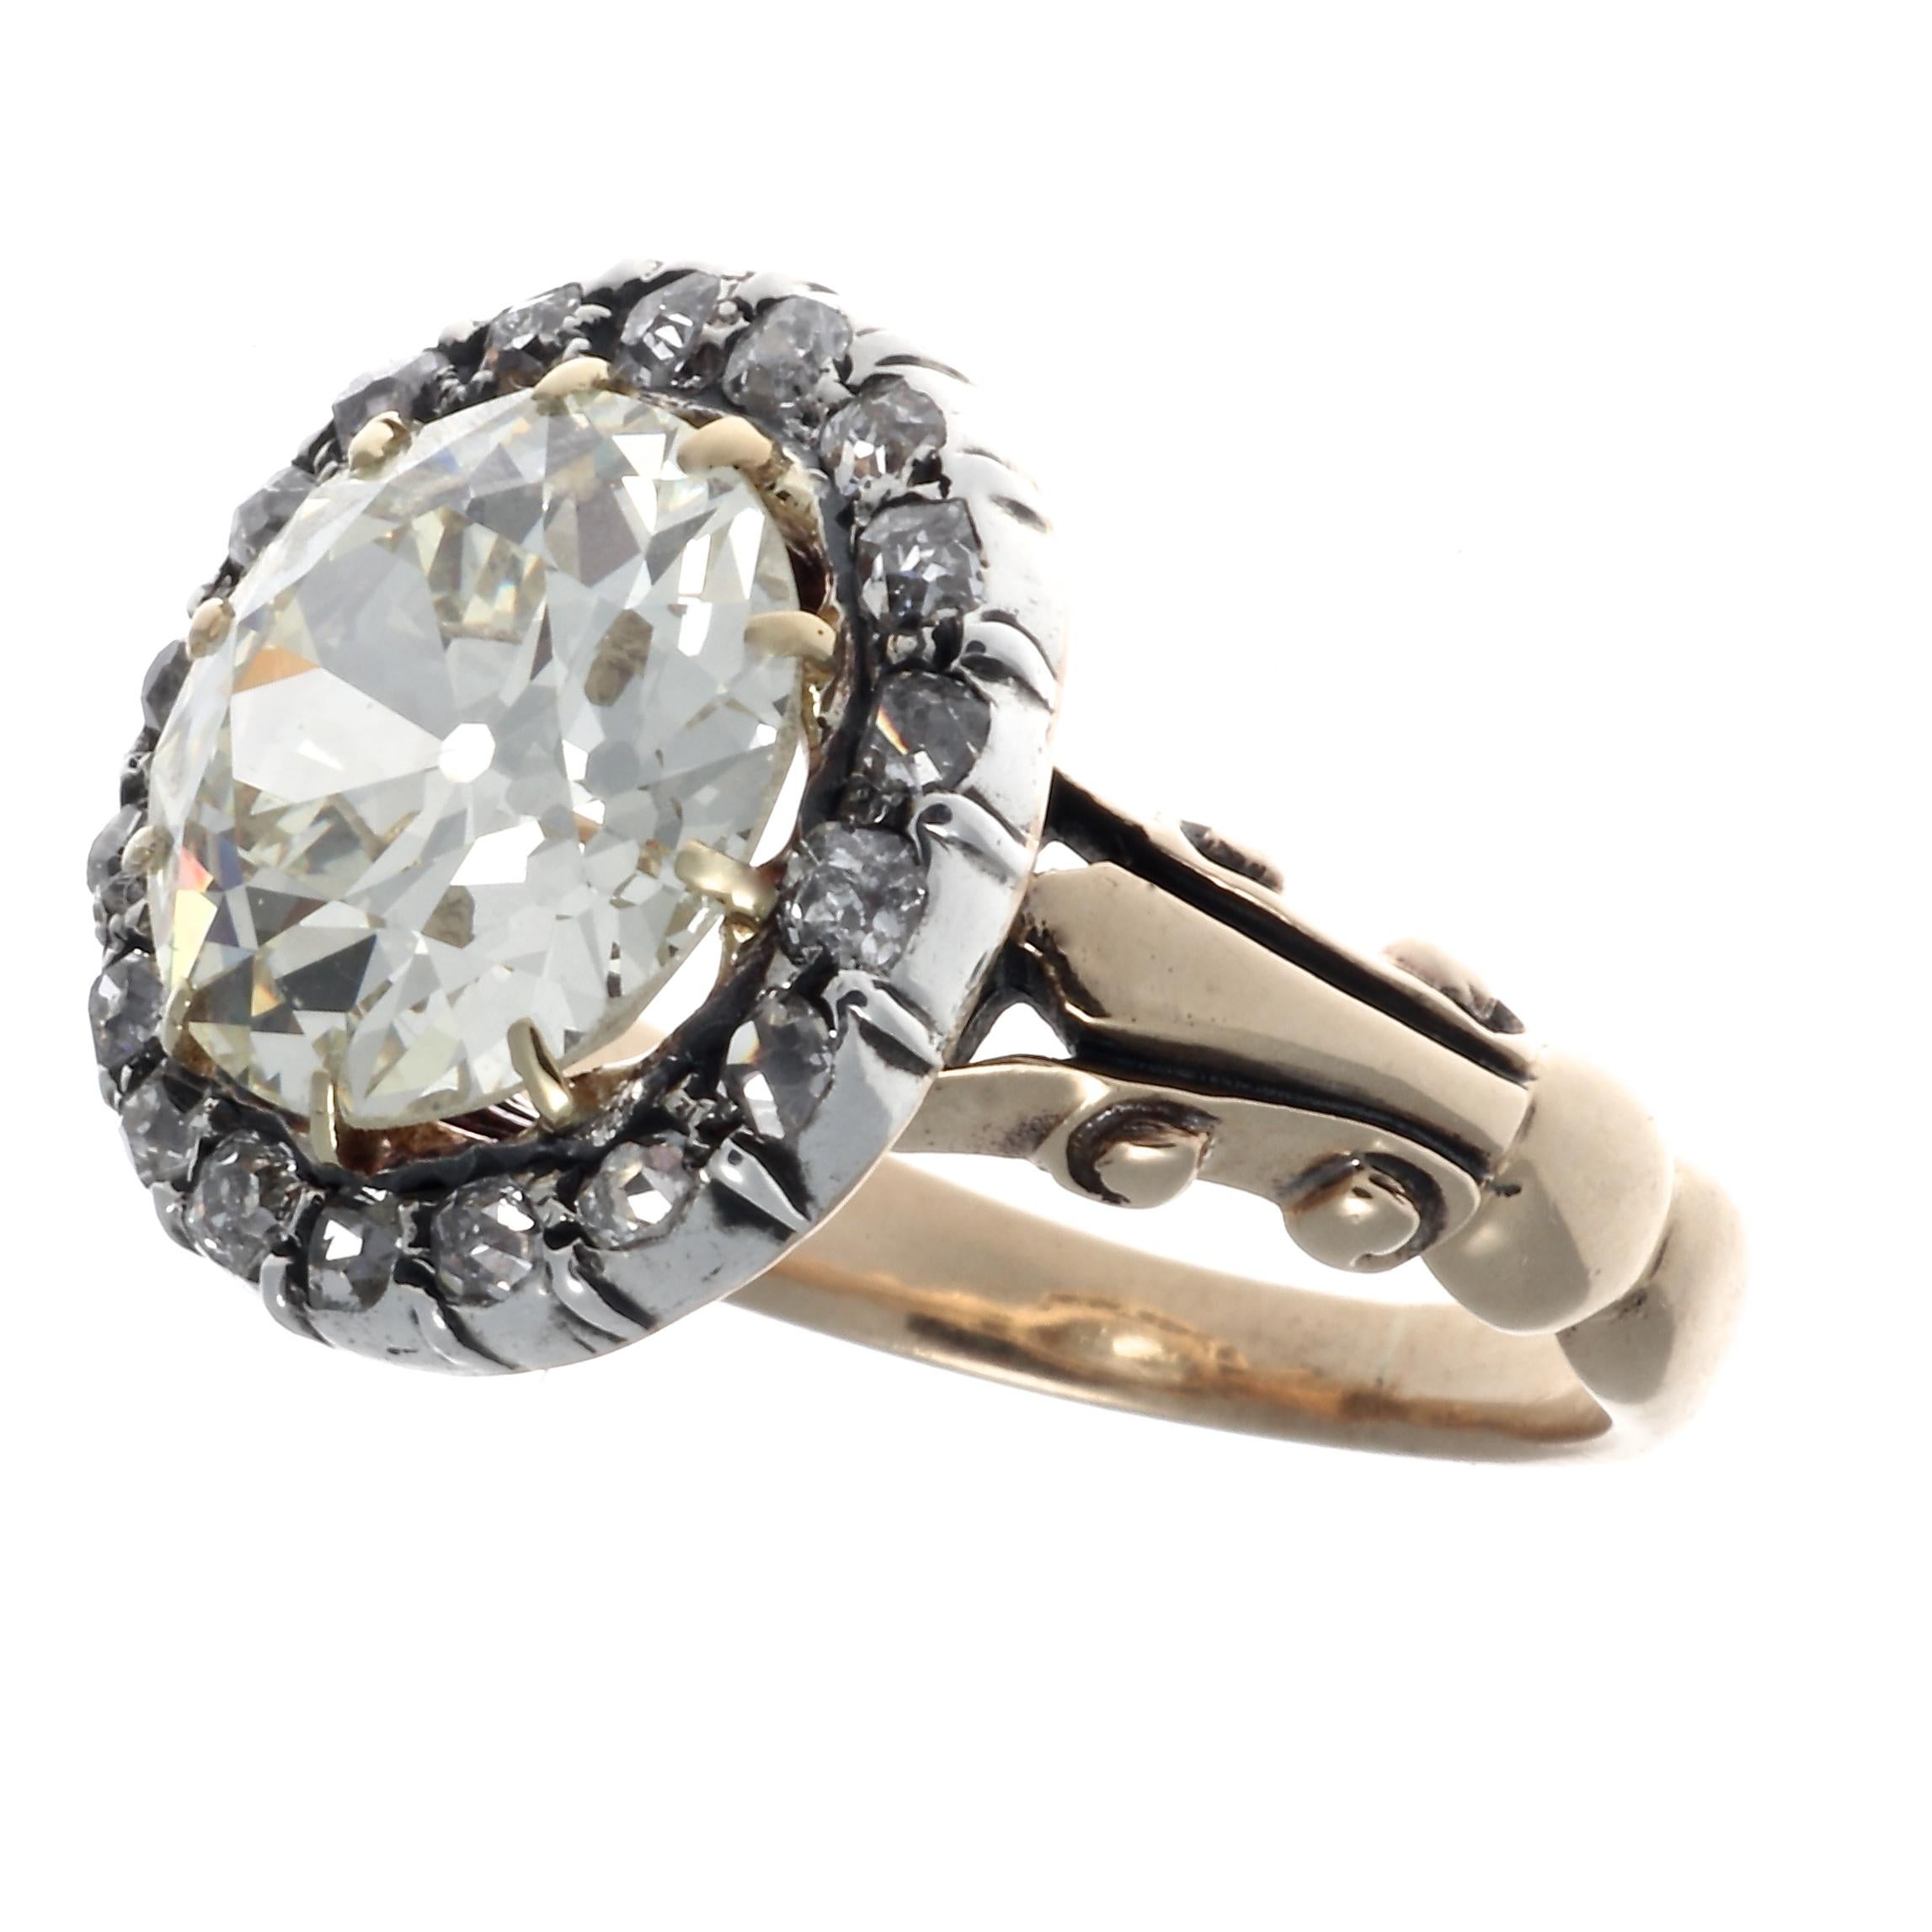 Unique and special late Georgian diamond and gold engagement ring. Featuring a 3.62 old European cut diamond graded O-P color, VS clarity. Surrounded by a halo of 18 old mine cut diamonds that weigh approximately 0.30 carats, graded I-J color, VS-SI